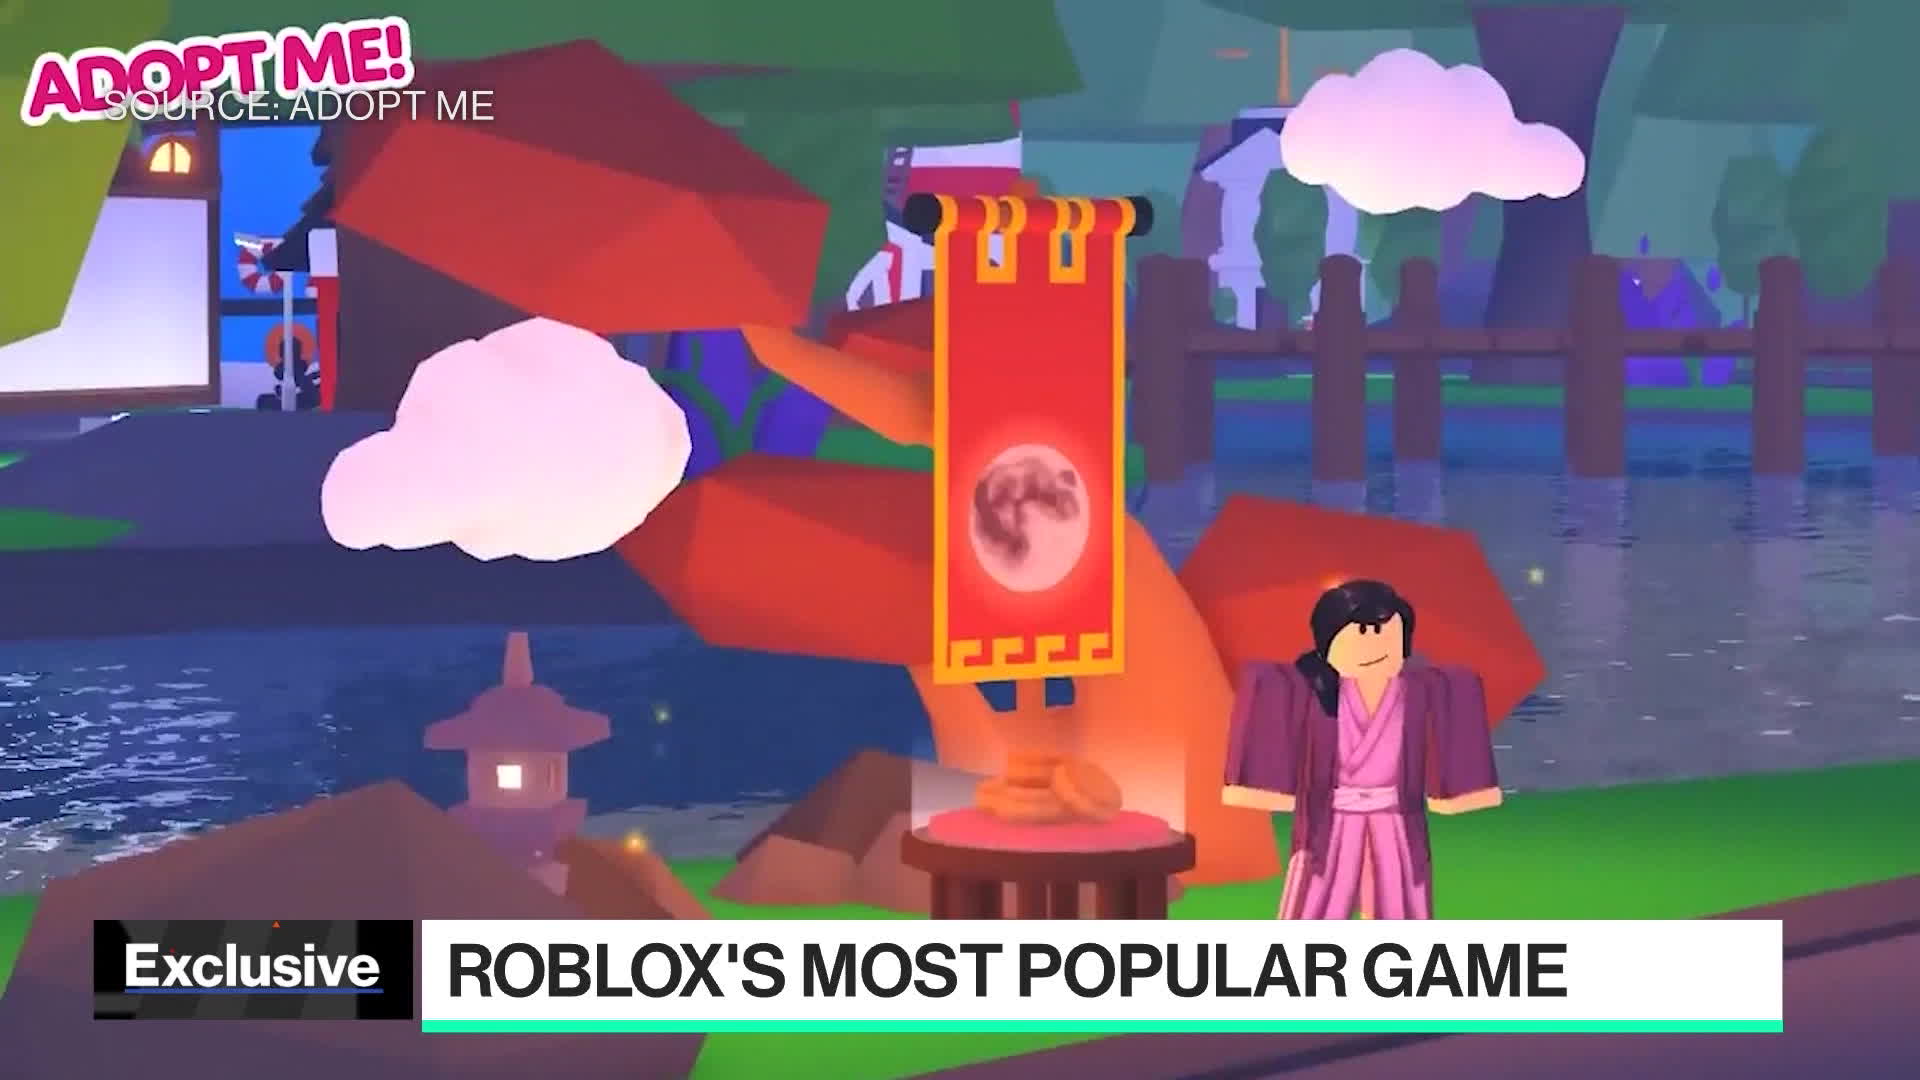 Roblox wants to rule the metaverse